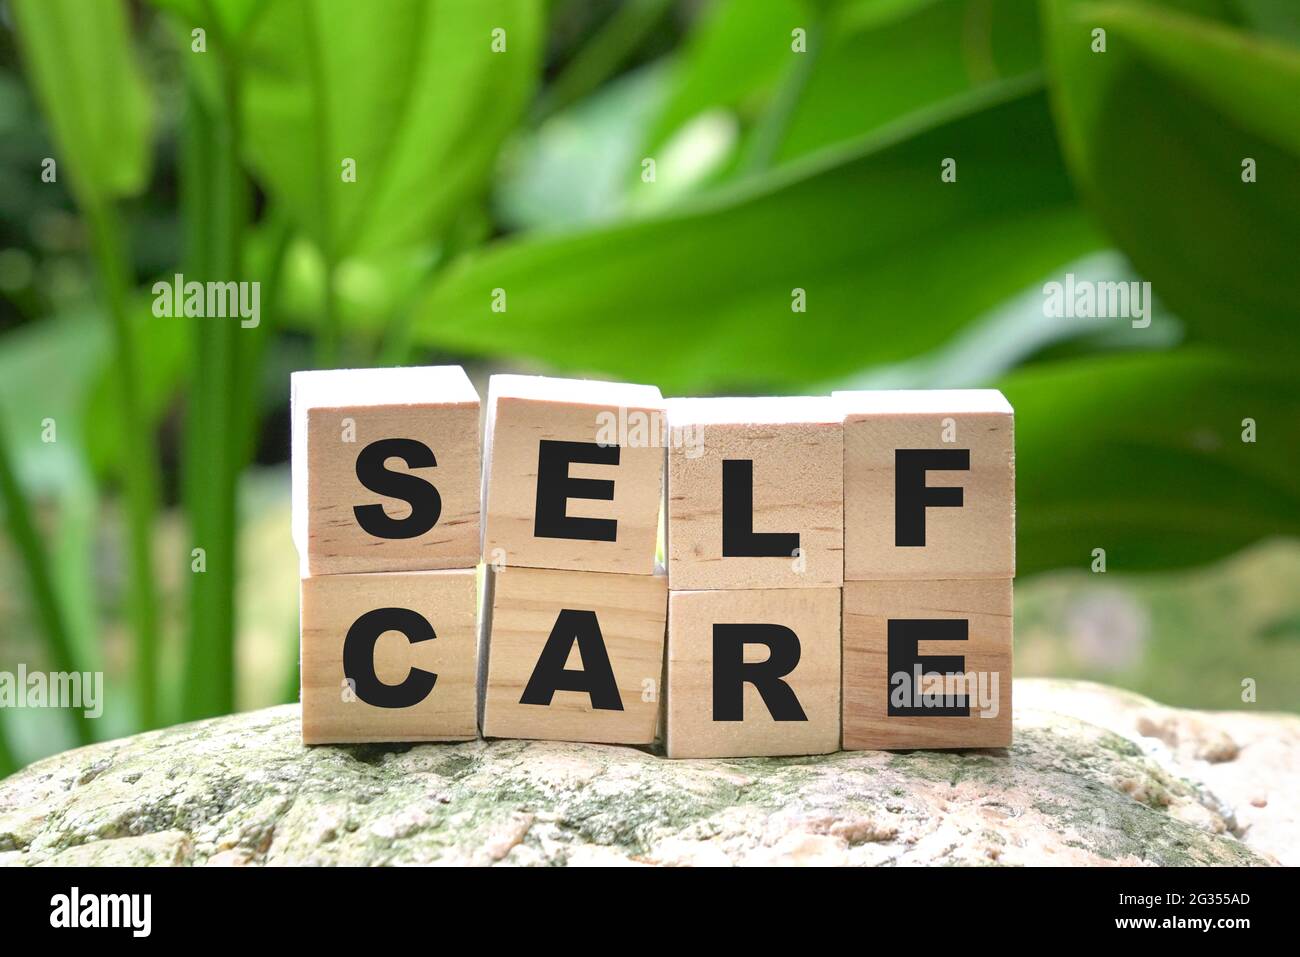 Self care word on wood cubes on green nature background. Take care of yourself message. Stock Photo